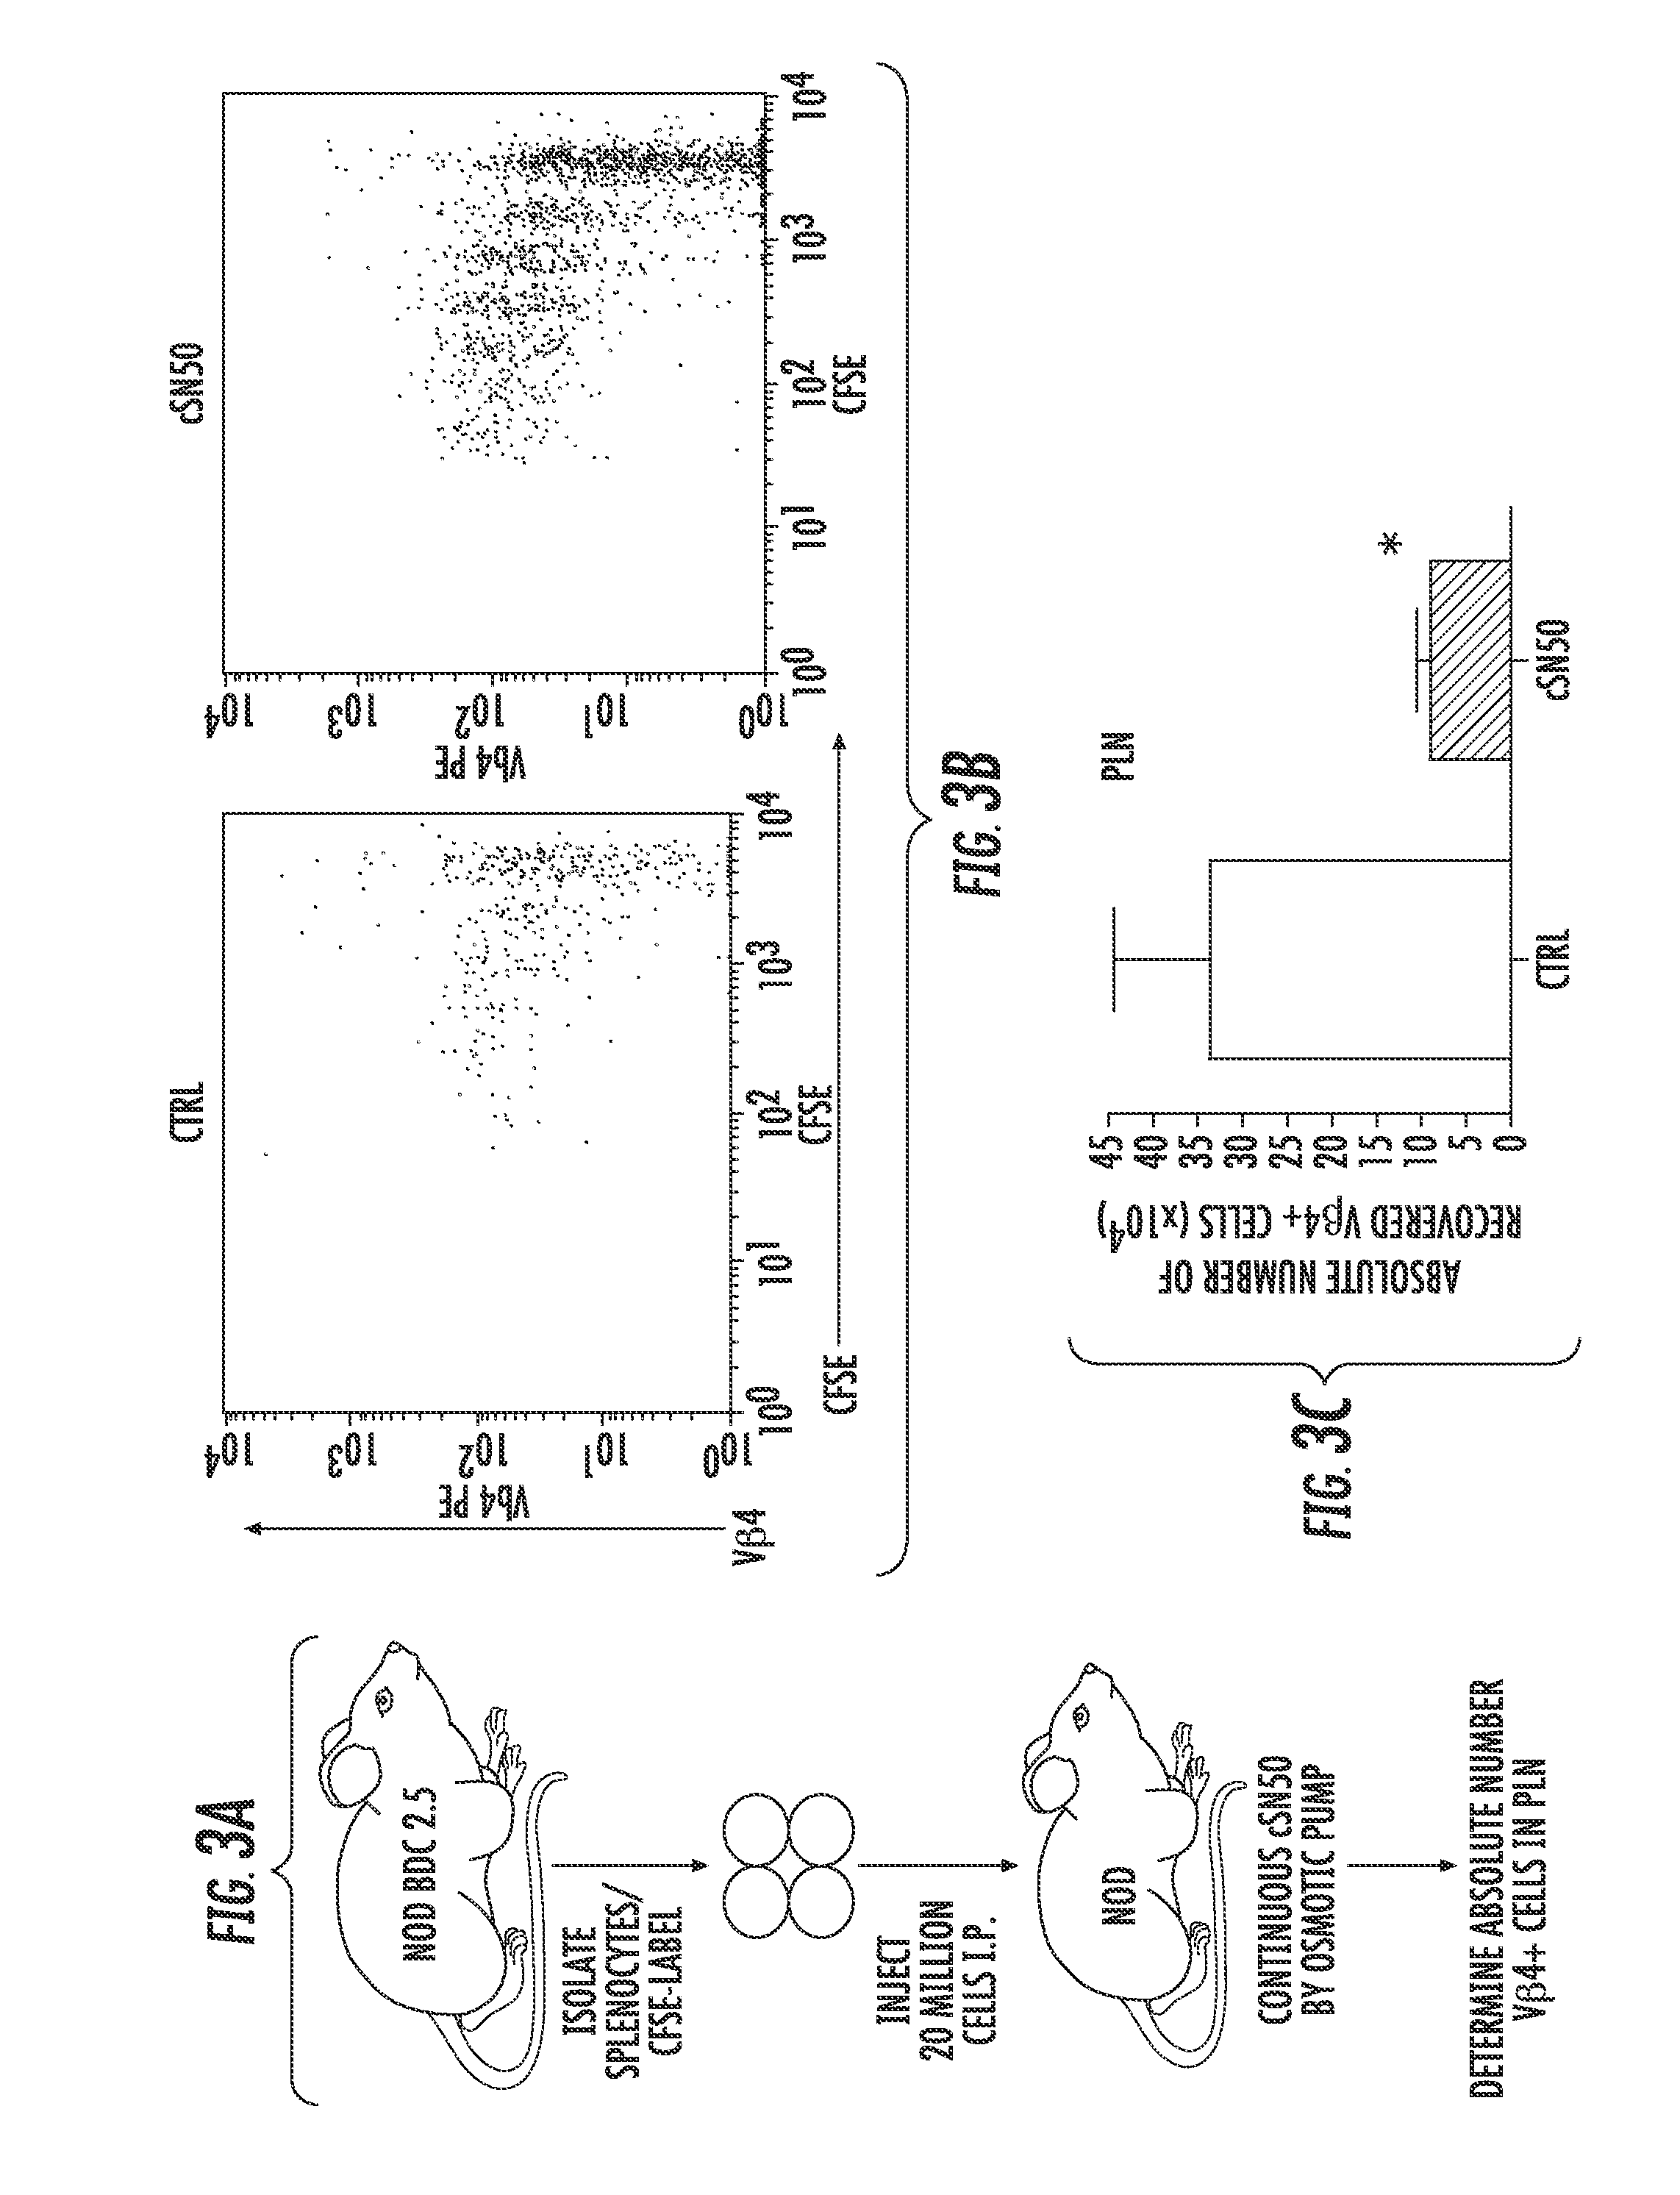 Compositions for preserving insulin-producing cells and insulin production and treating diabetes